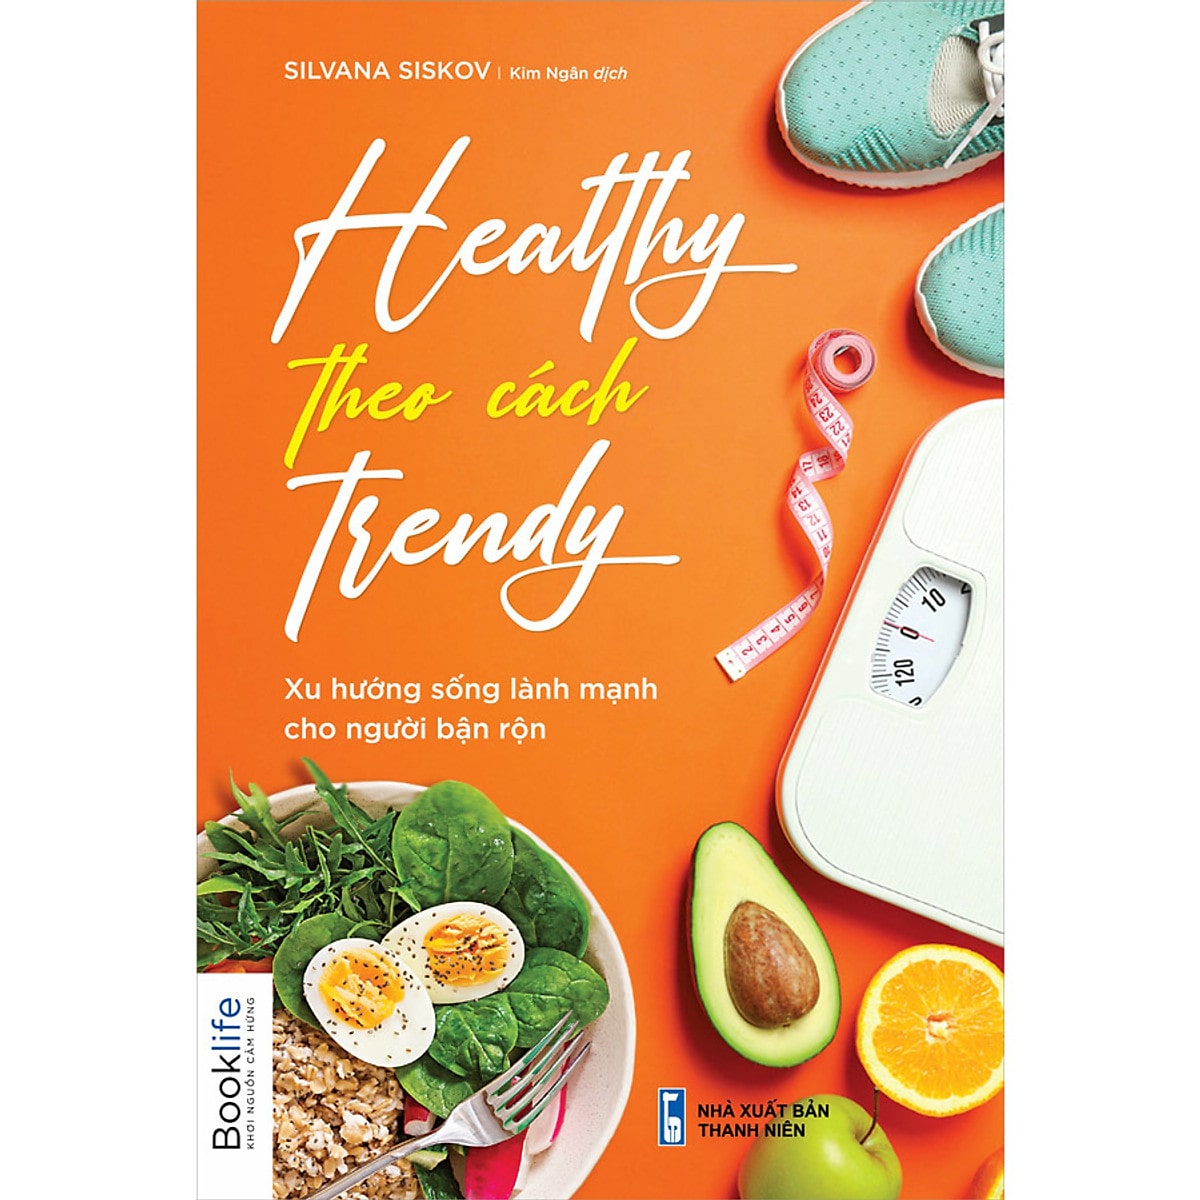 07-Healthy theo cach trendy-min